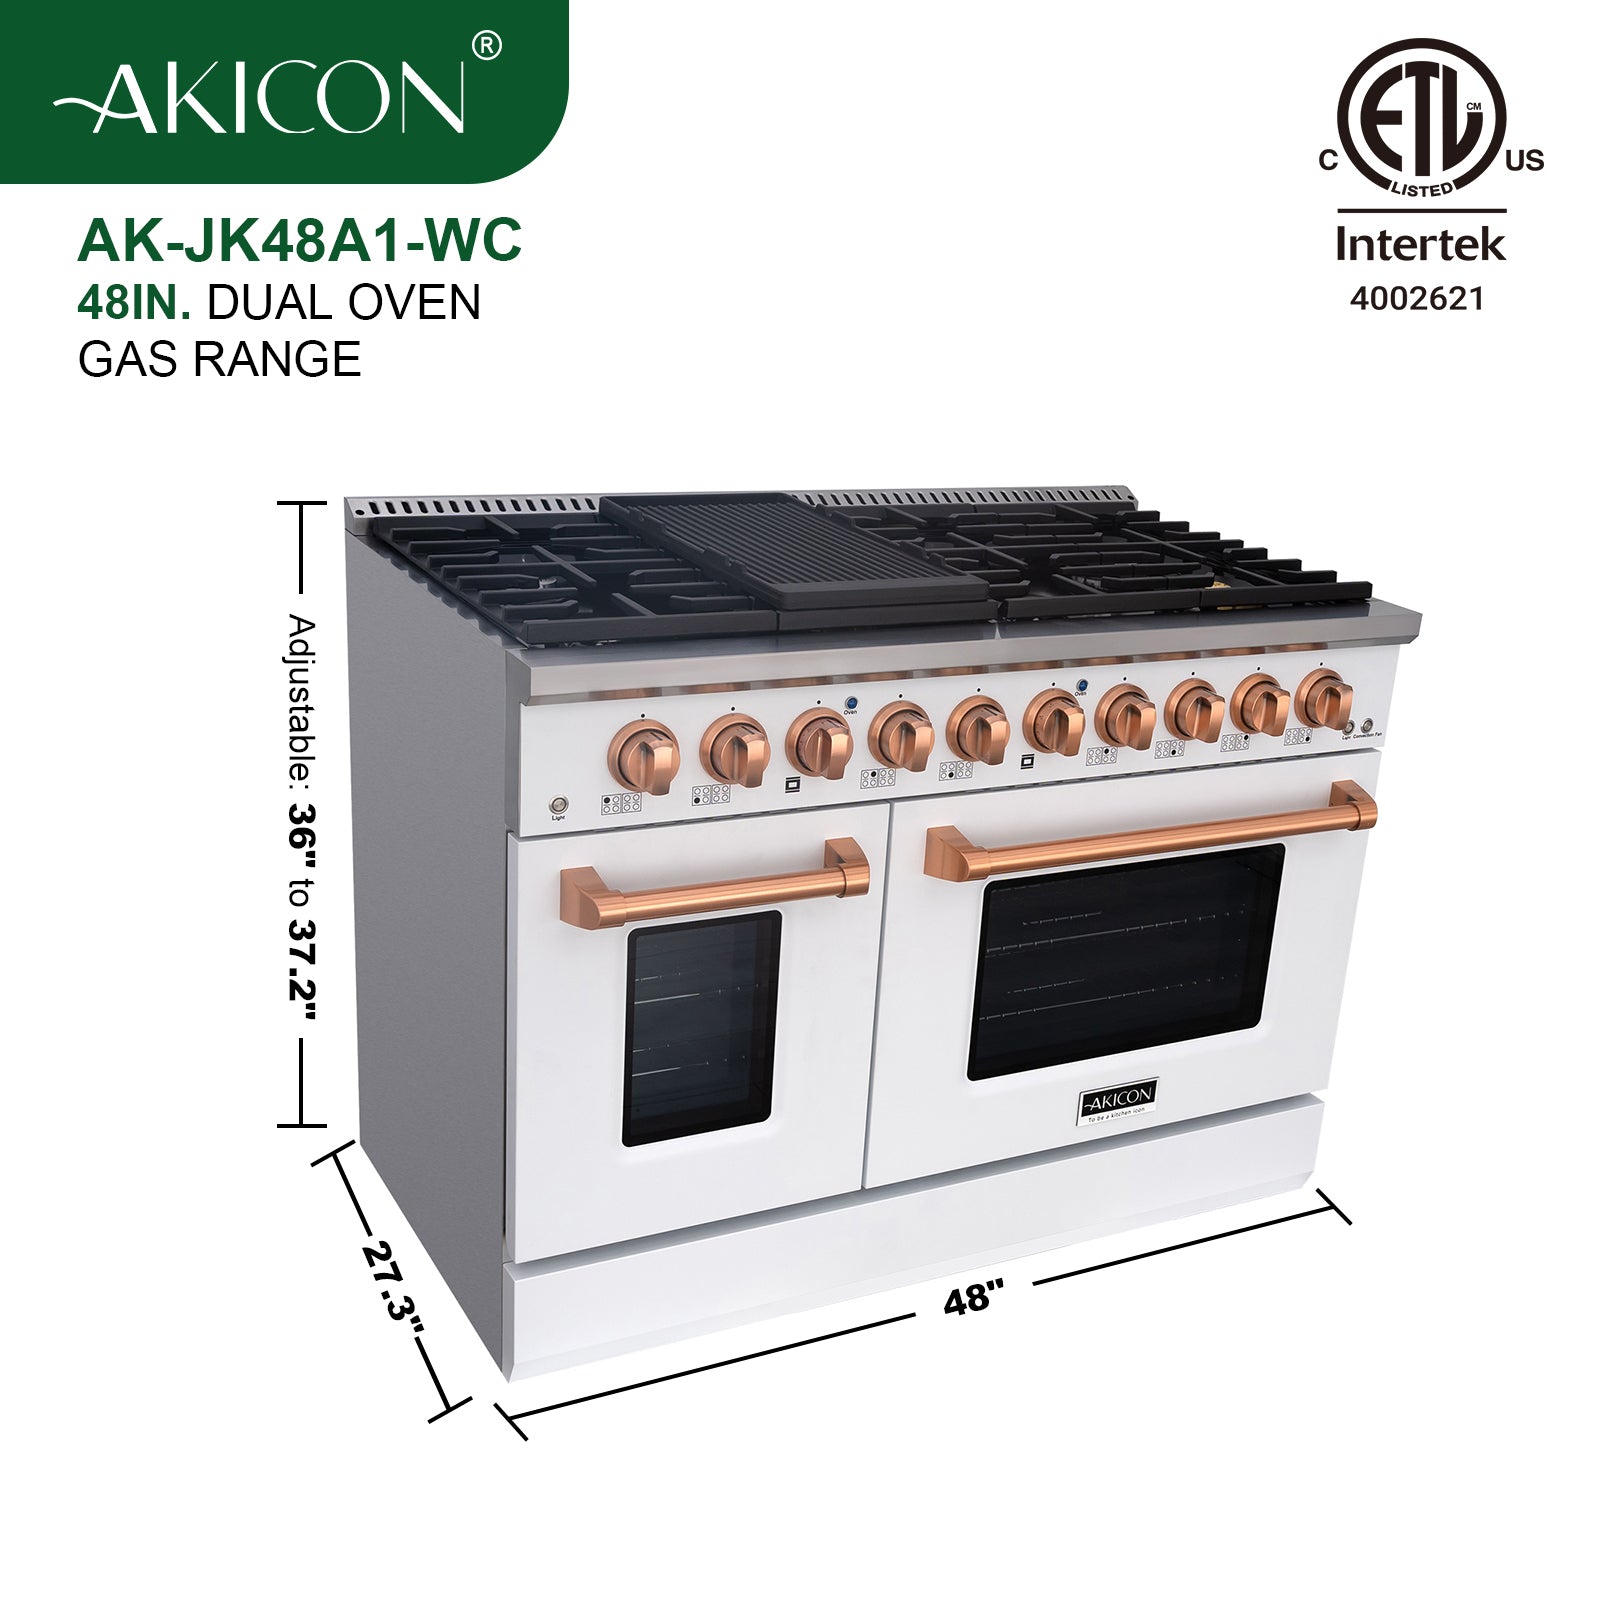 Akicon 48" Slide-in Freestanding Professional Style Gas Range with 6.7 Cu. Ft. Oven, 8 Burners, Convection Fan, Cast Iron Grates. White & Copper